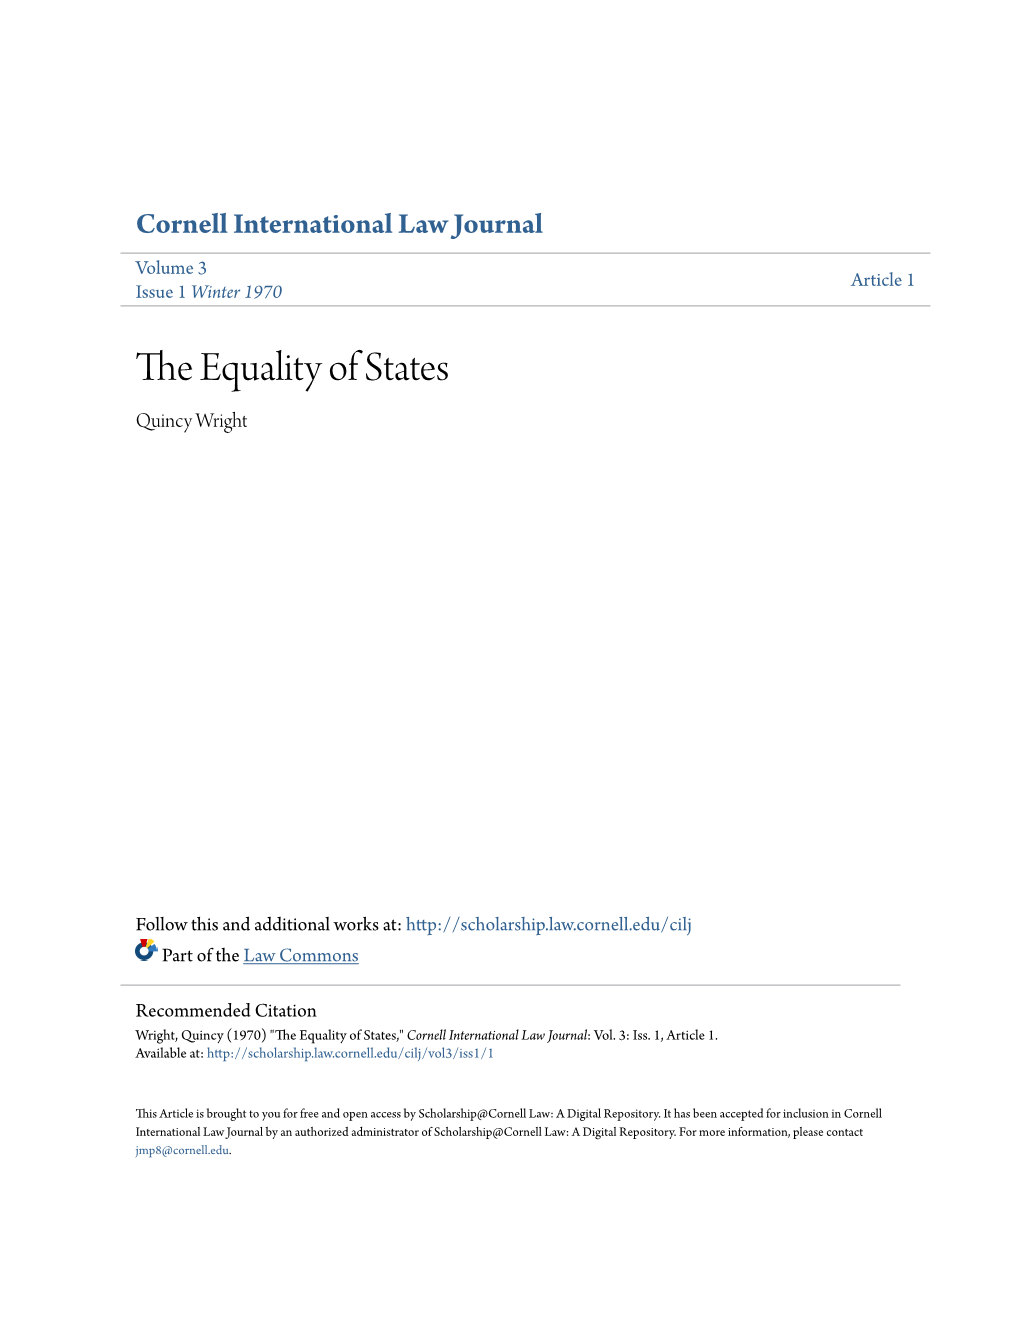 The Equality of States